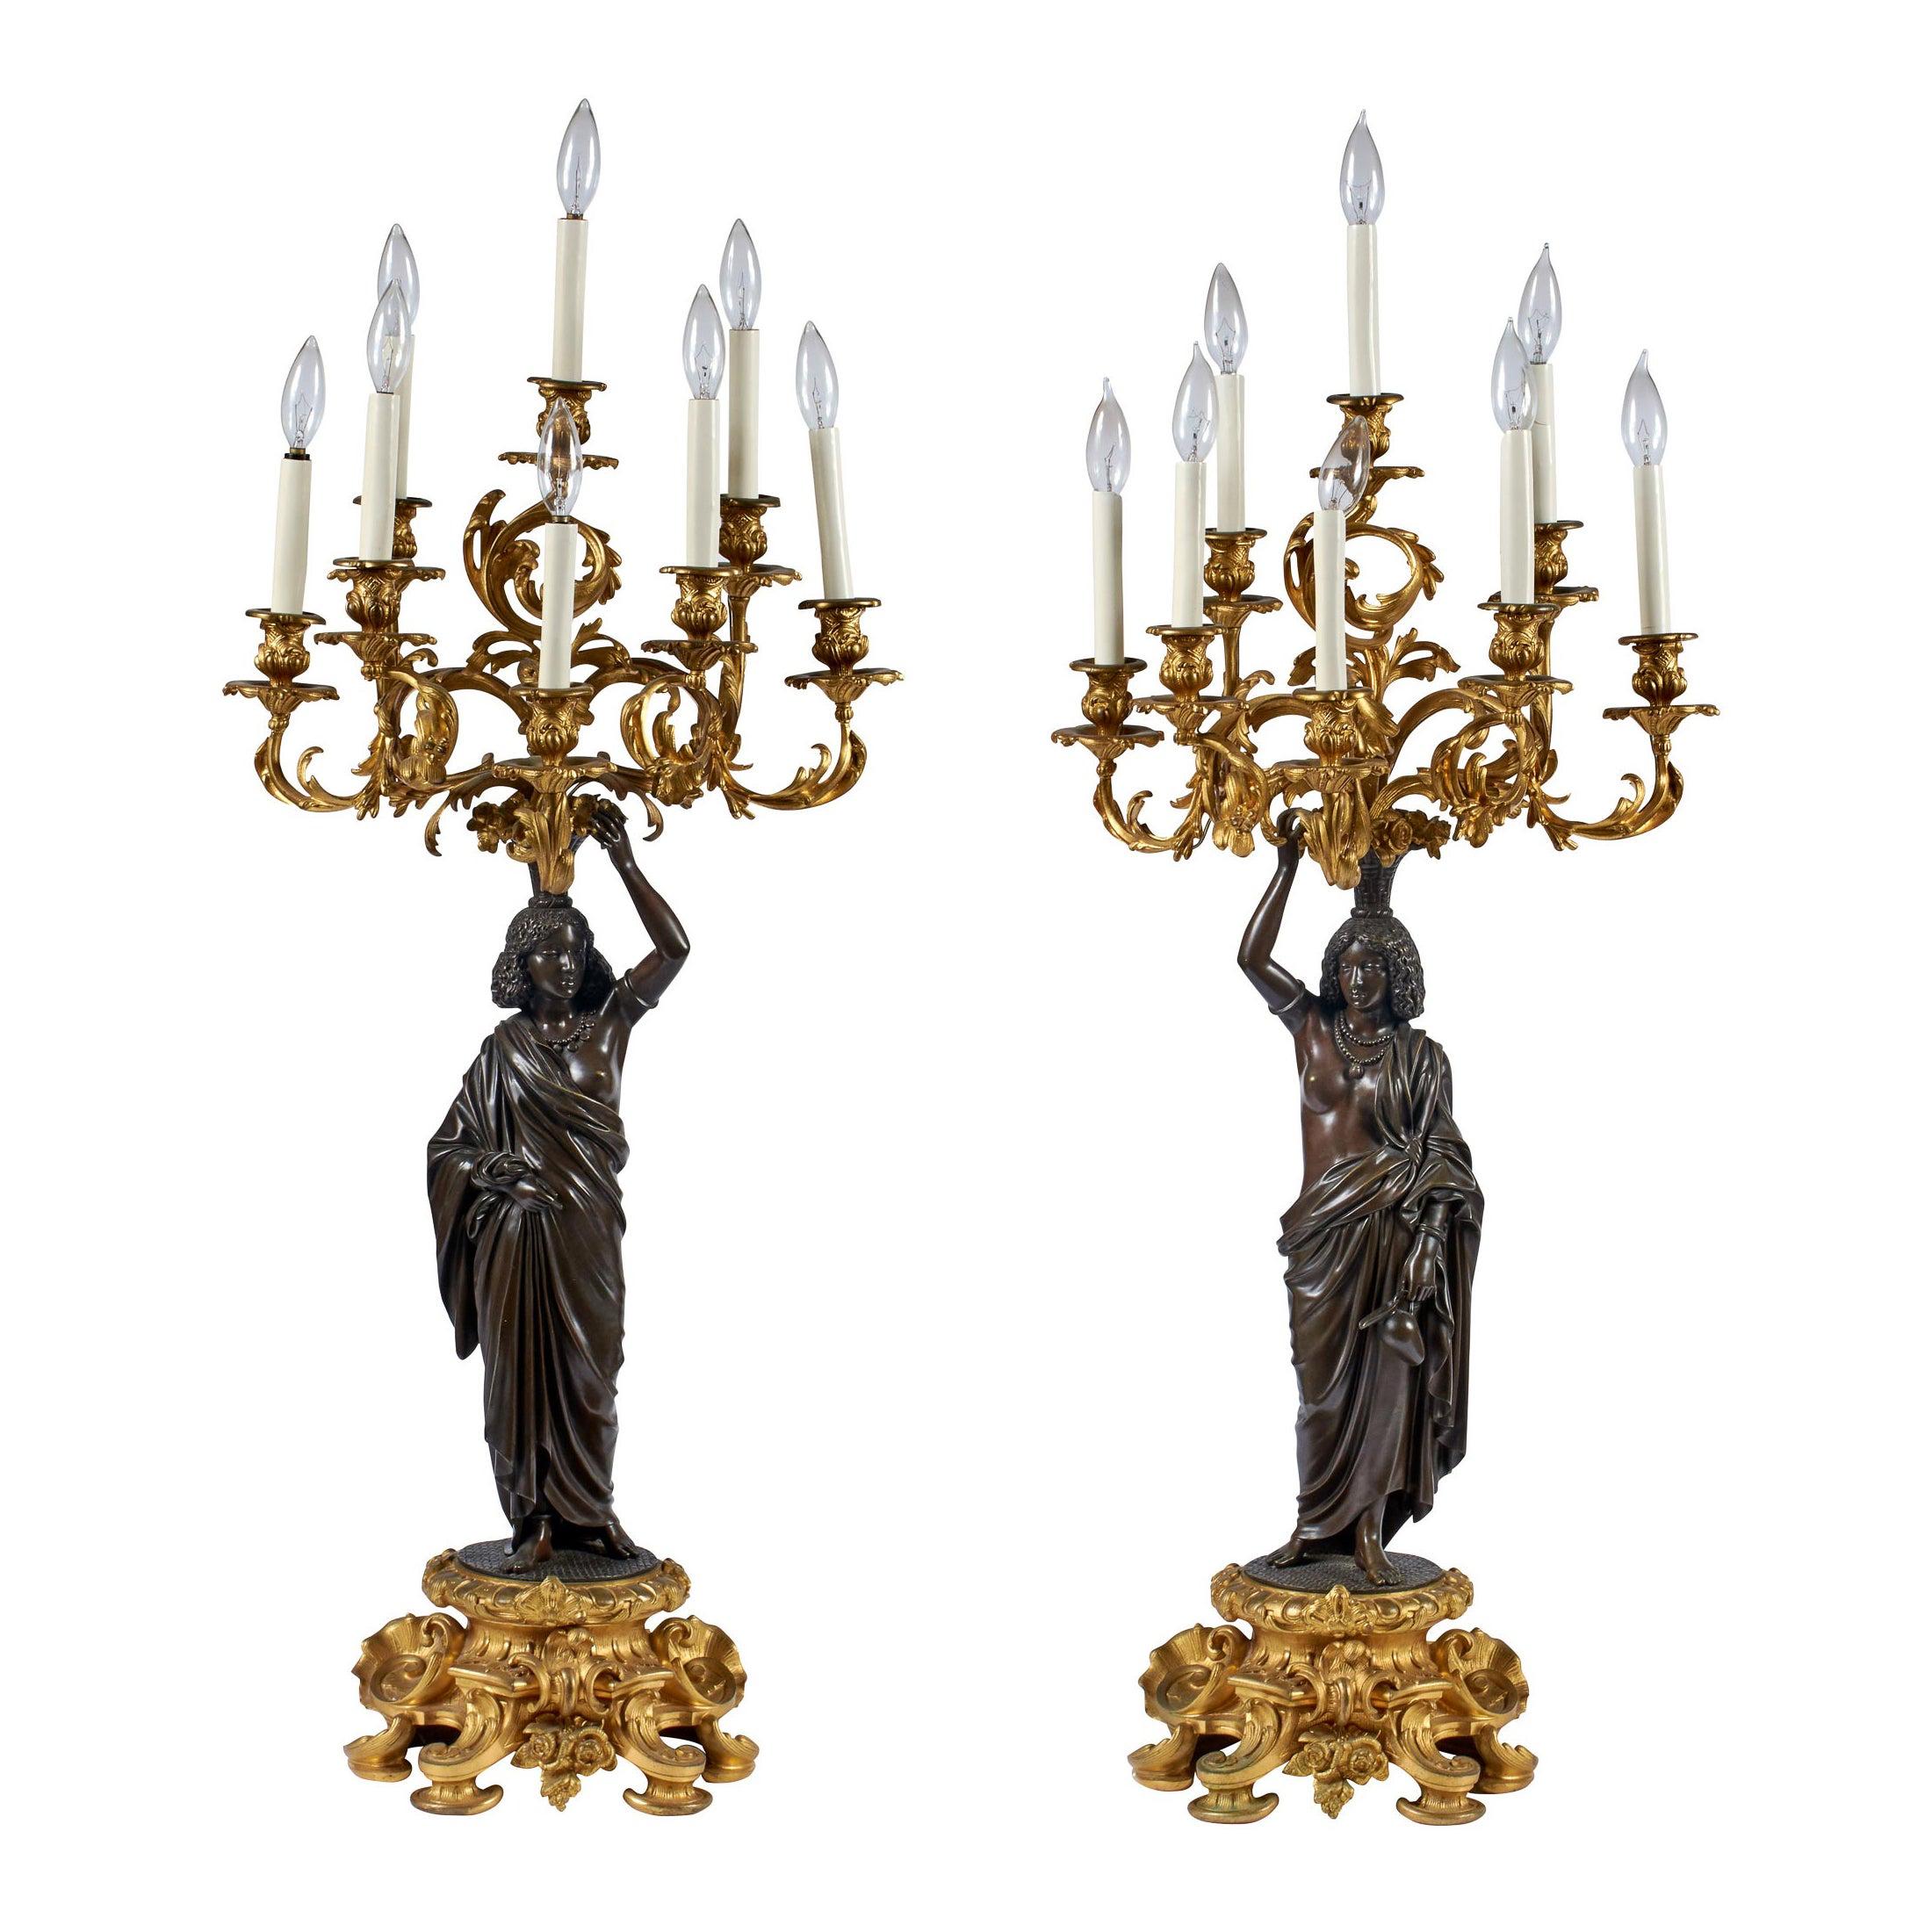 Pair of Ormolu and Patinated Bronze Figural Eight-Light Candelabras